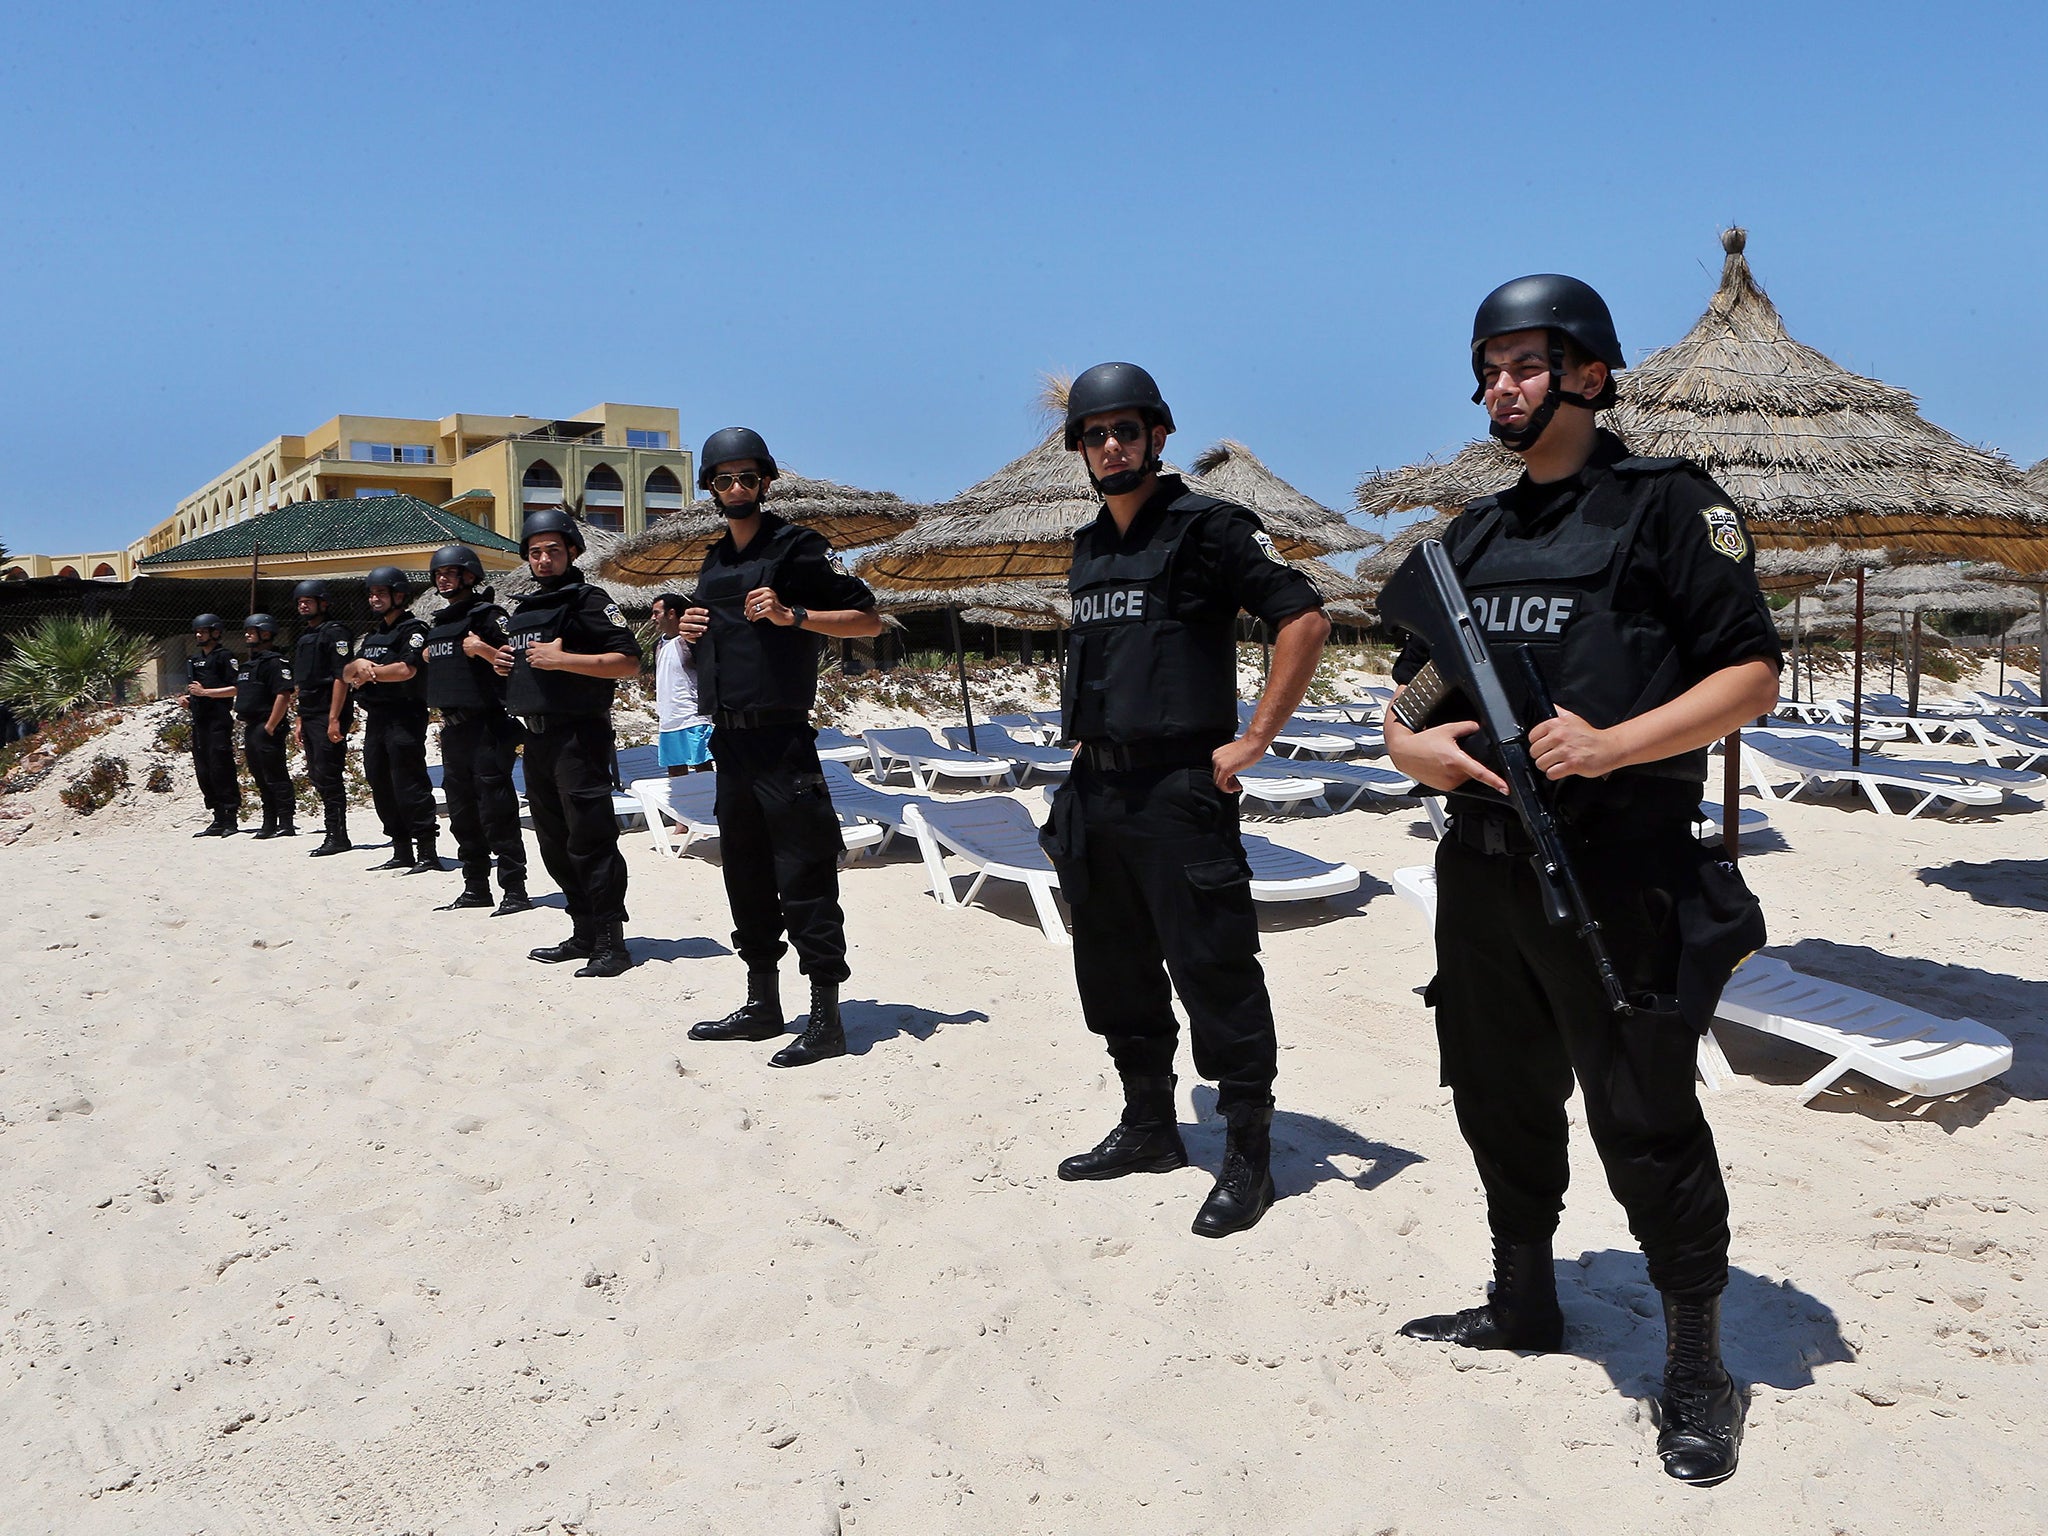 Tunisia has ramped up counter-terrorism operations since the Bardo Museum attack and beach massacre